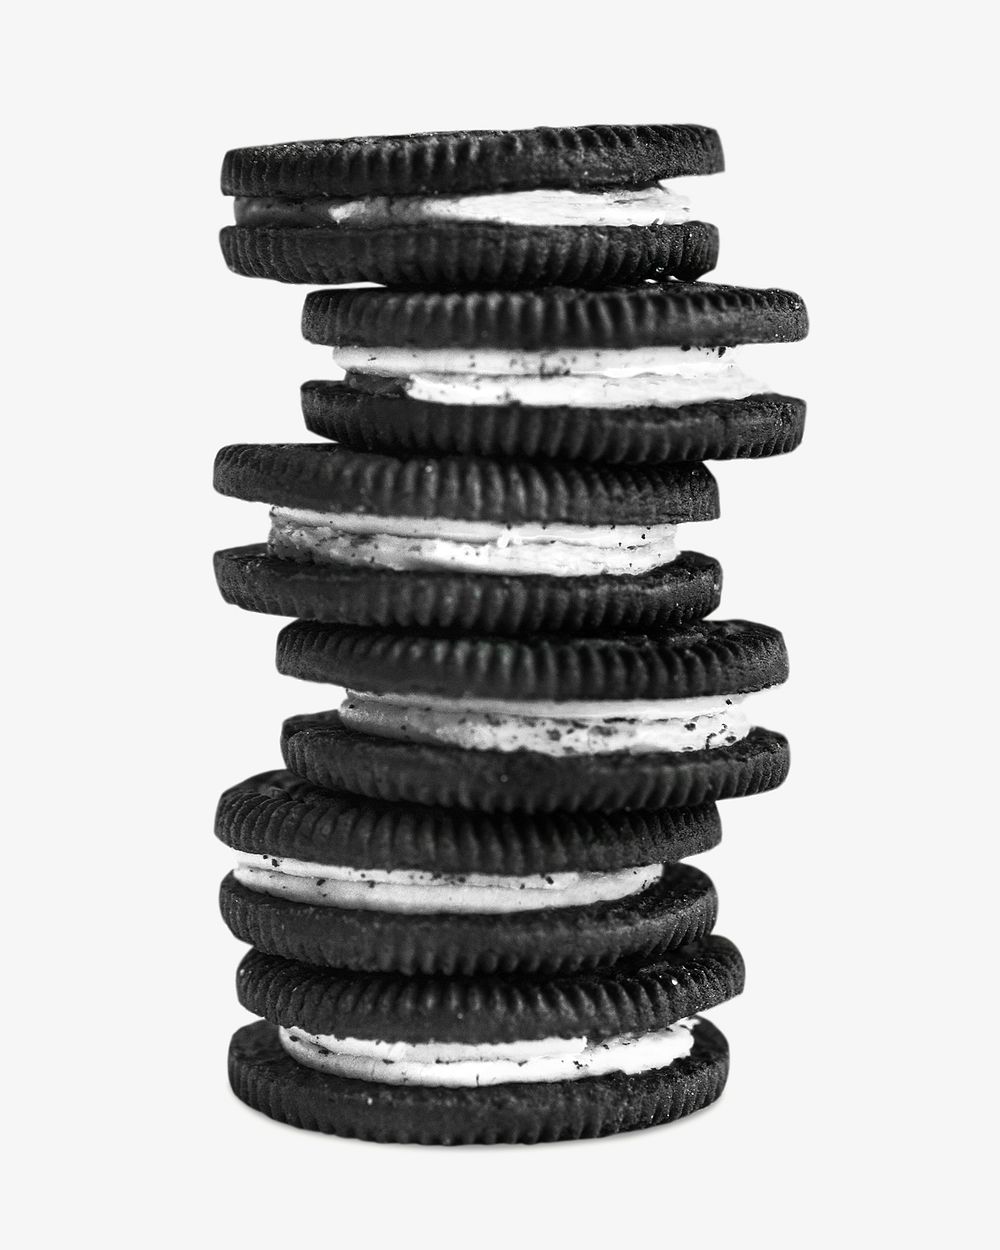 Stack of cookie and cream image element